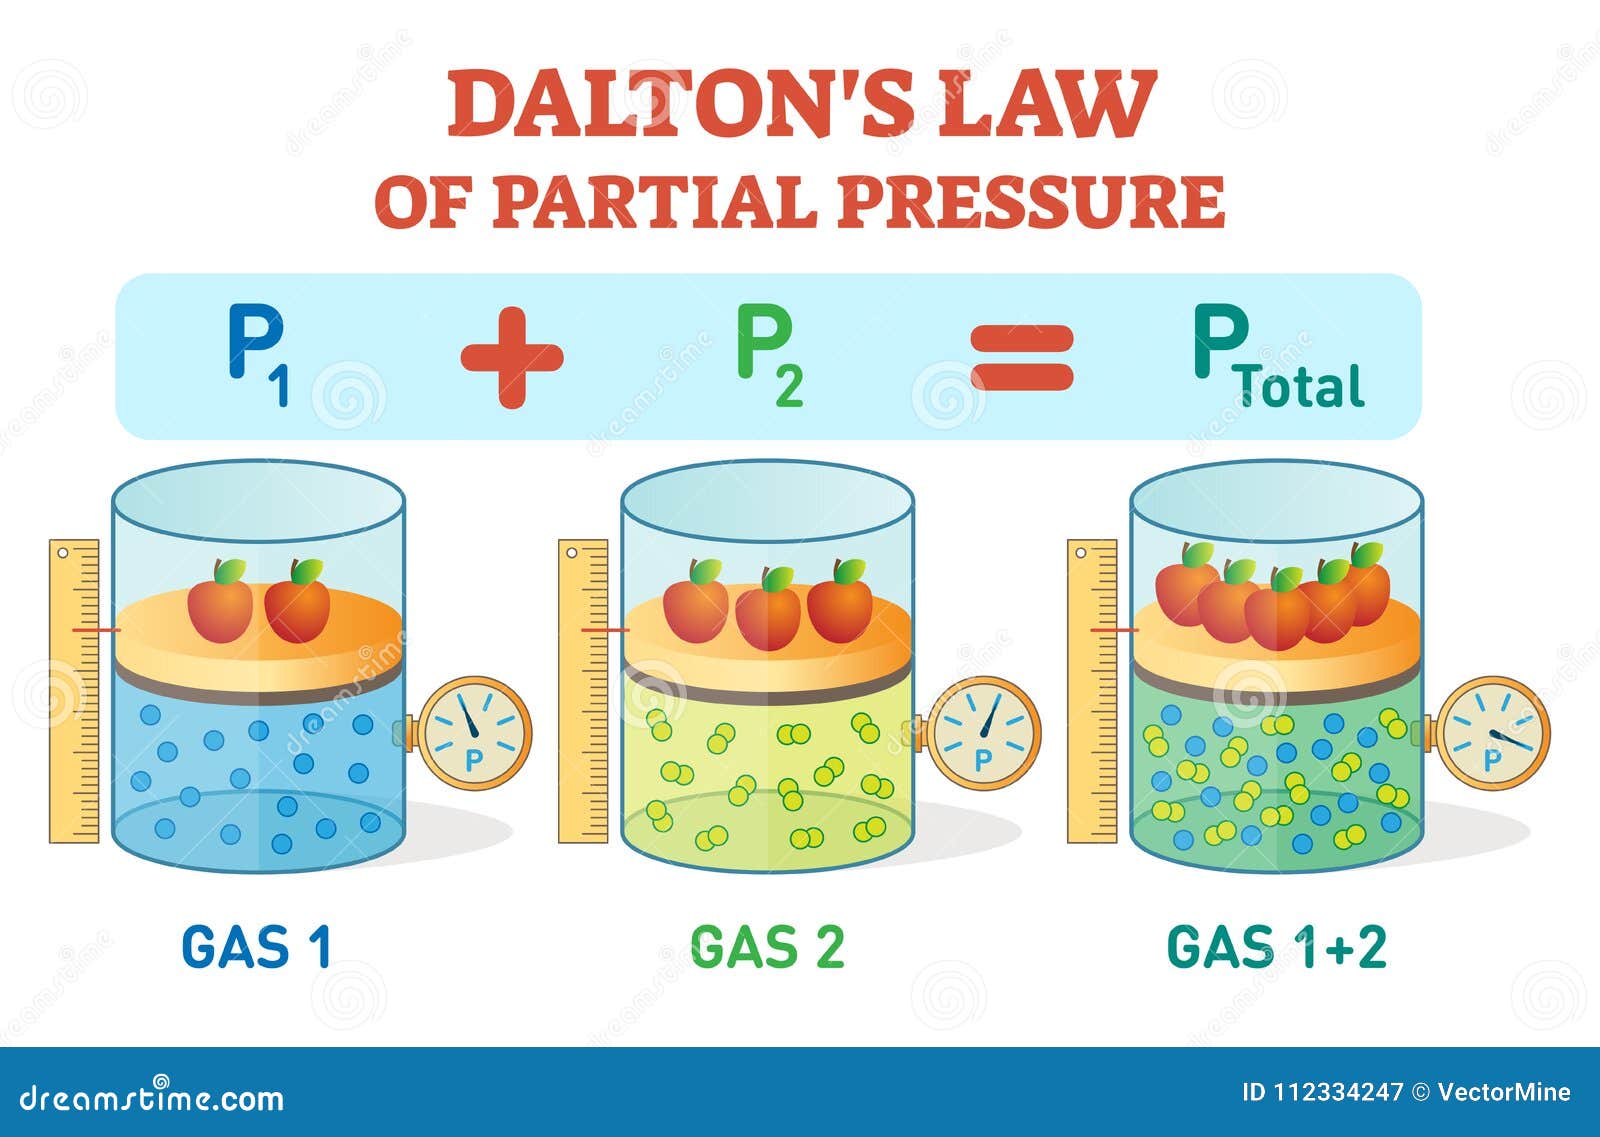 dalton`s law, chemical physics example information poster with partial pressure law.educational  .